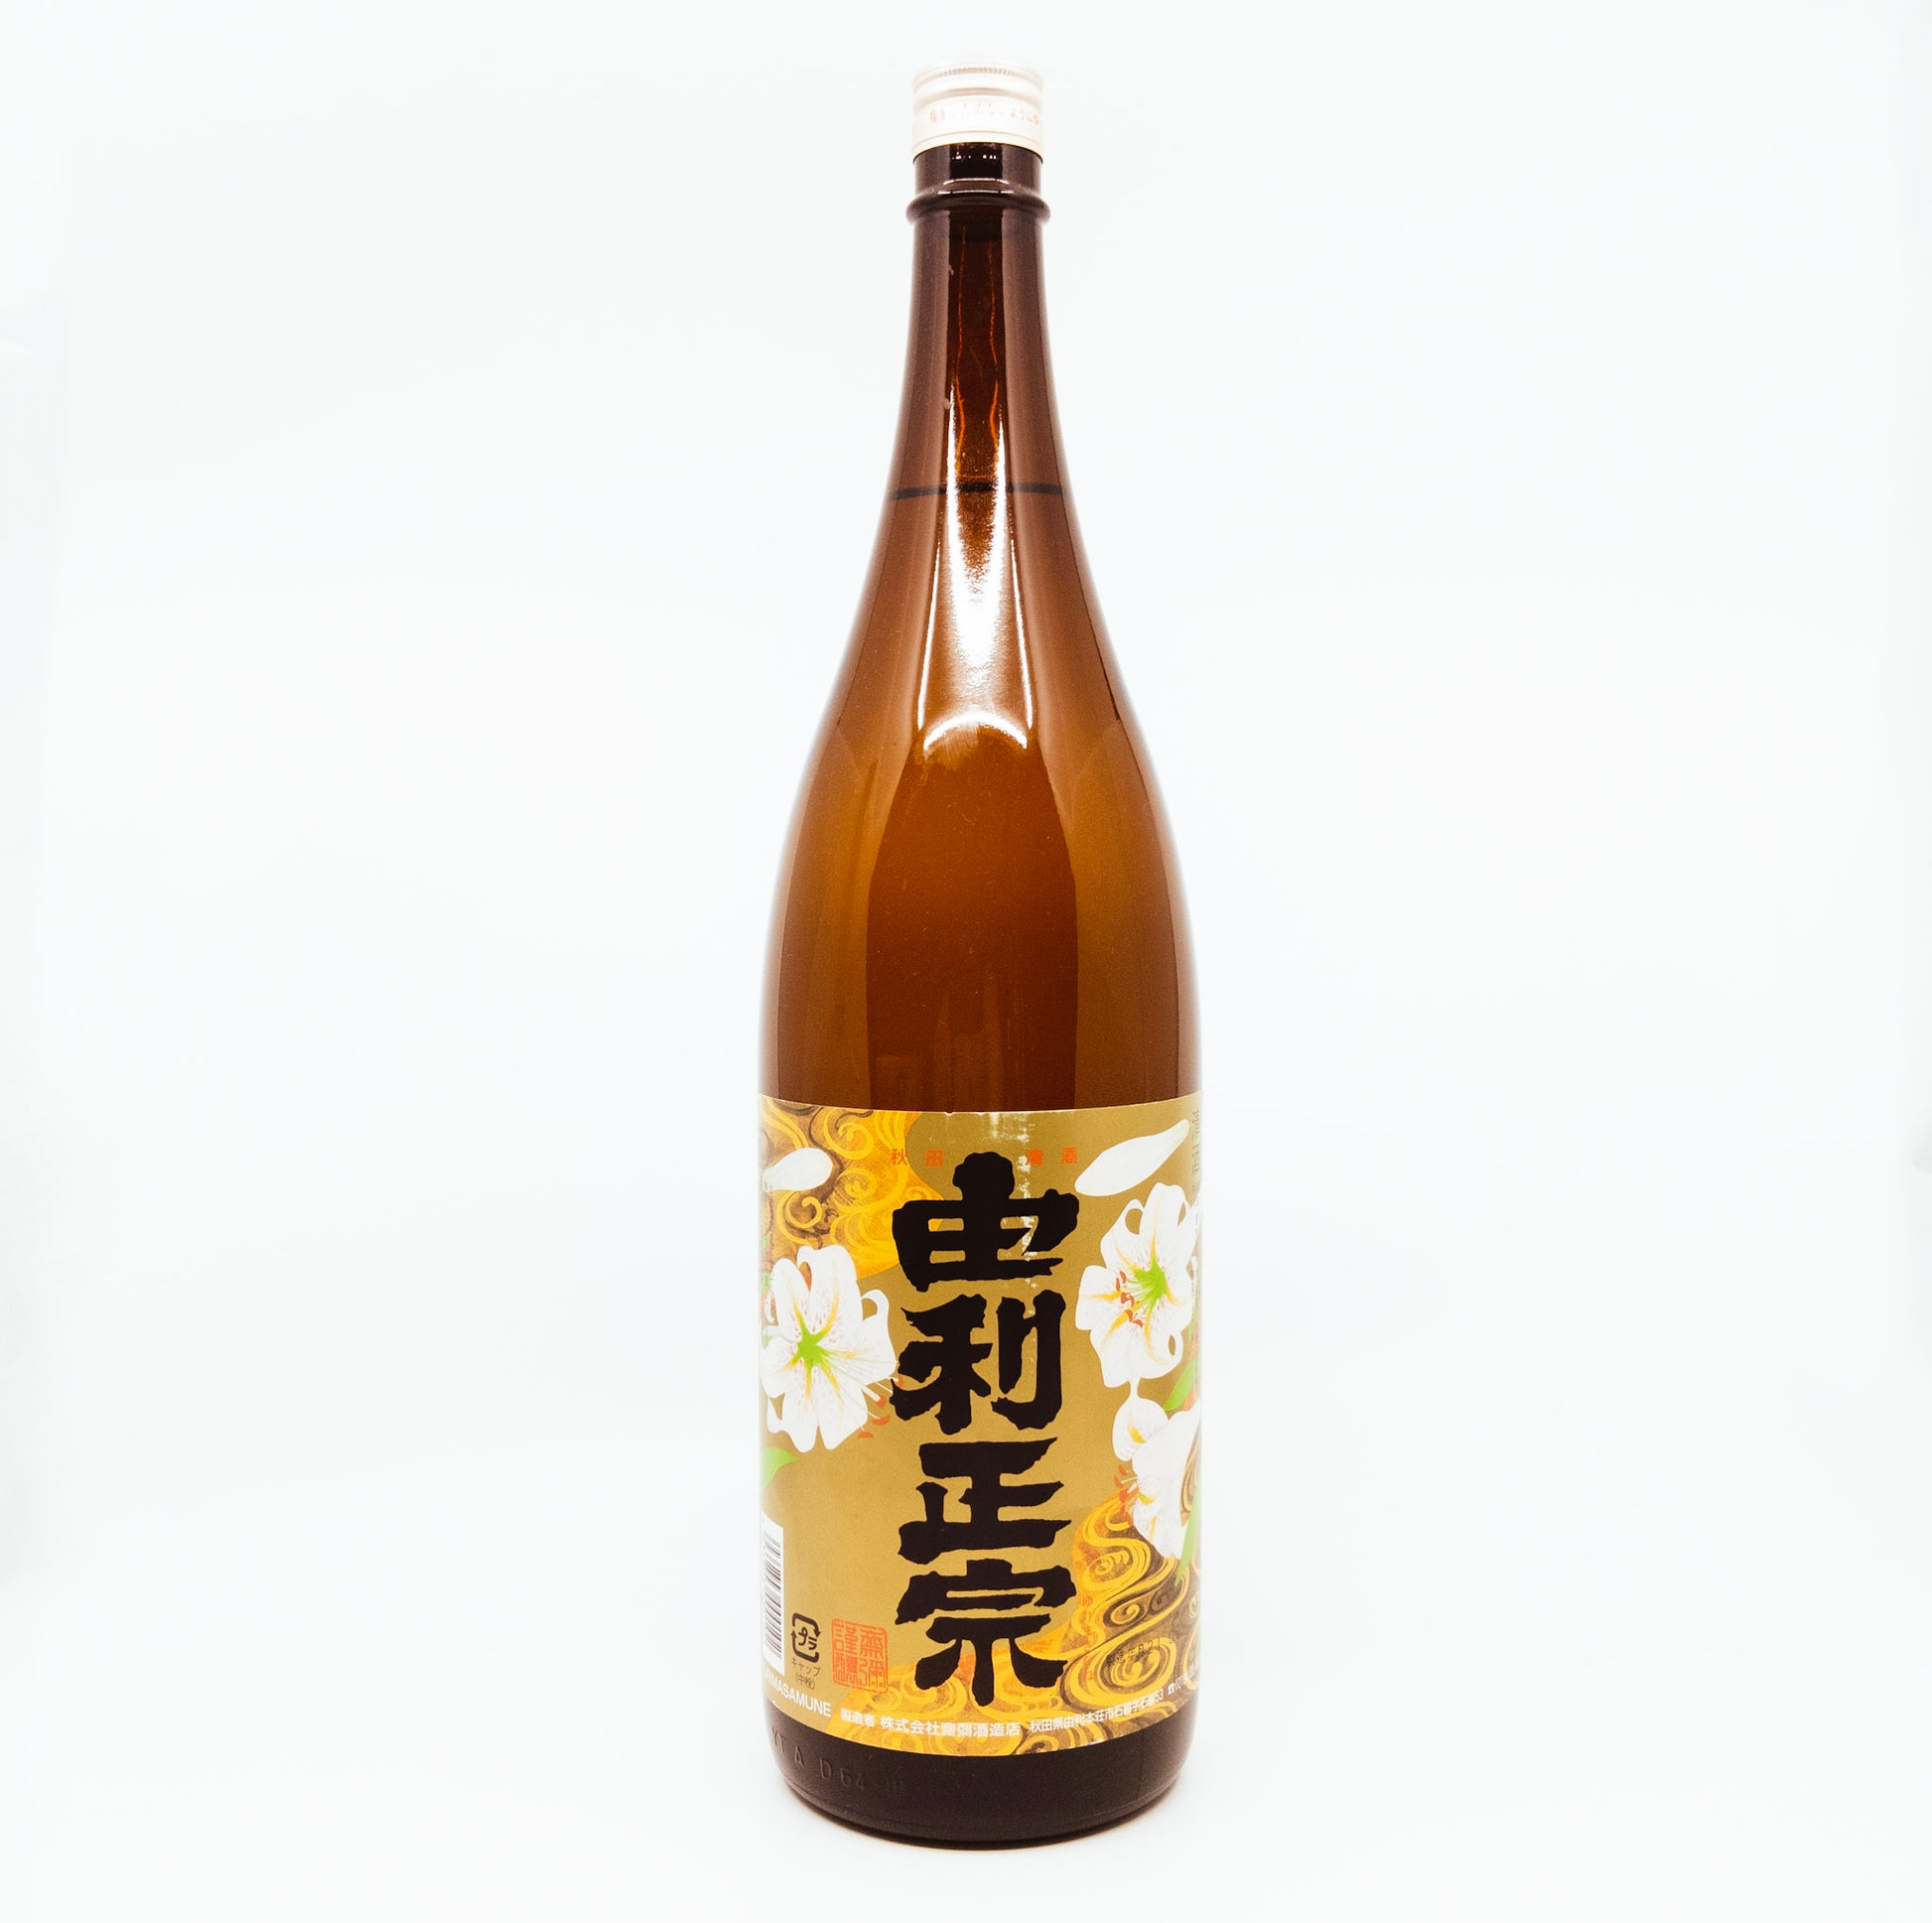 large brown bottle with white flowers on brown label